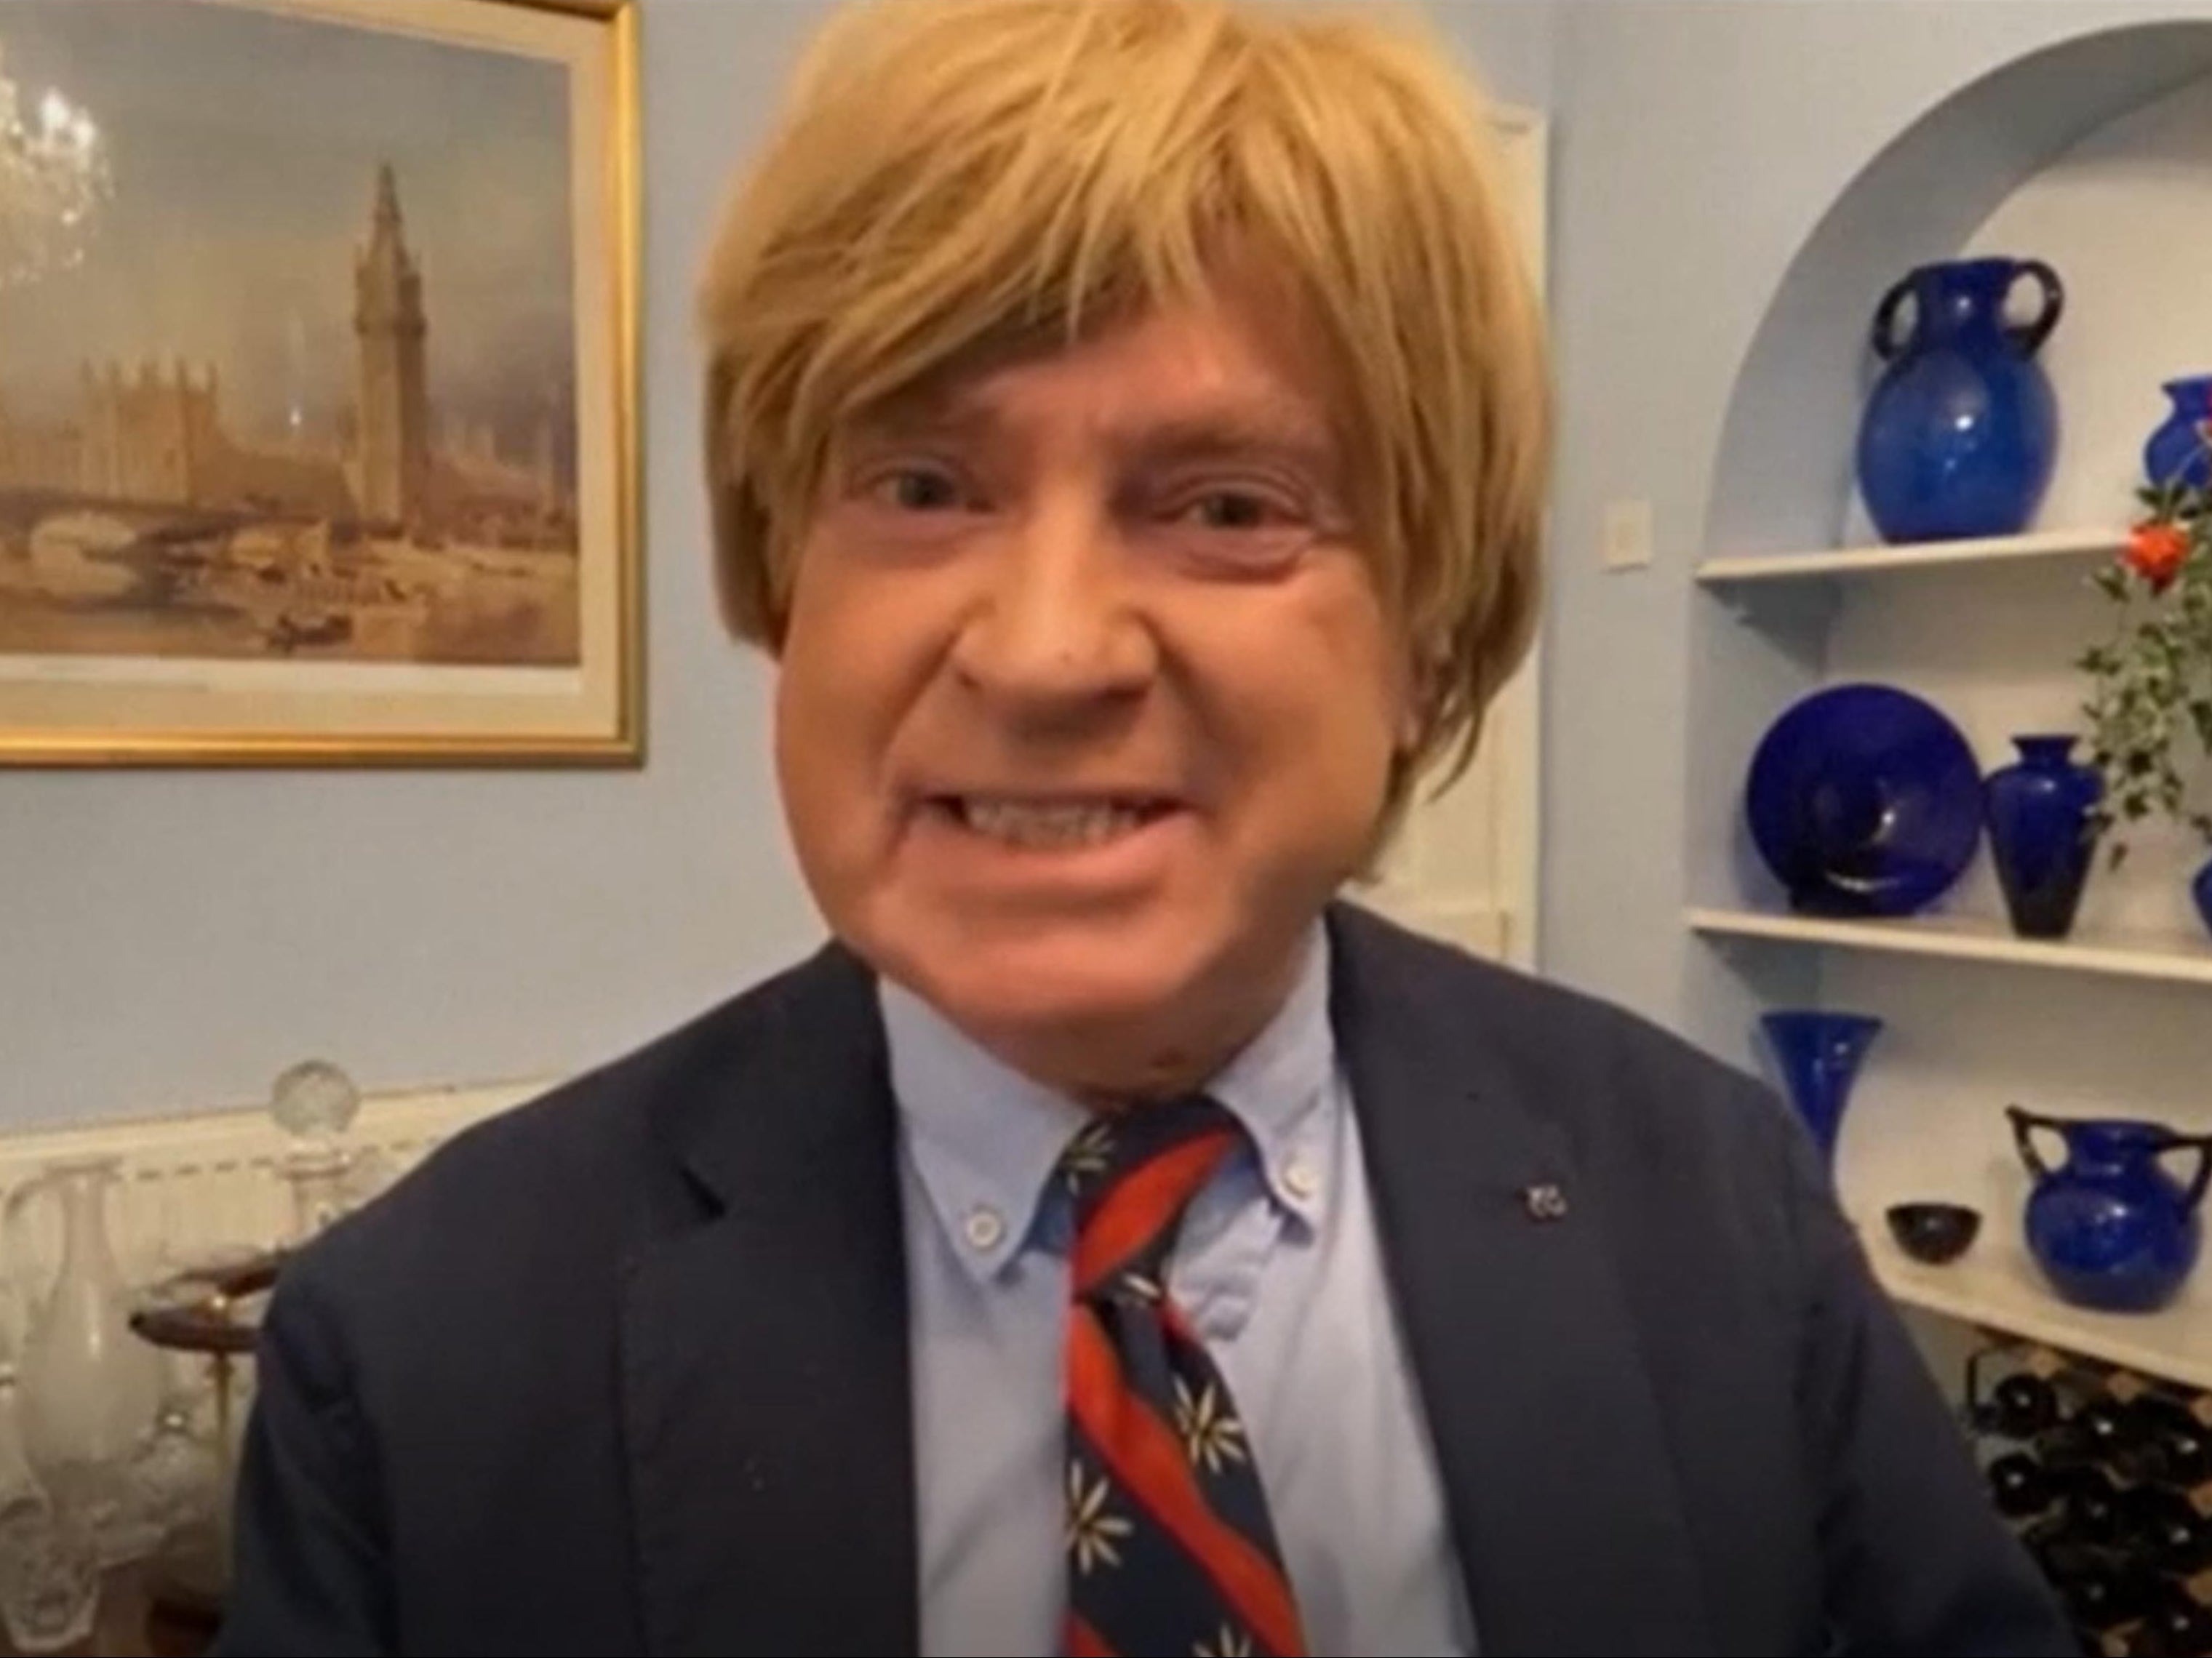 Michael Fabricant has been a Conservative MP since 1992